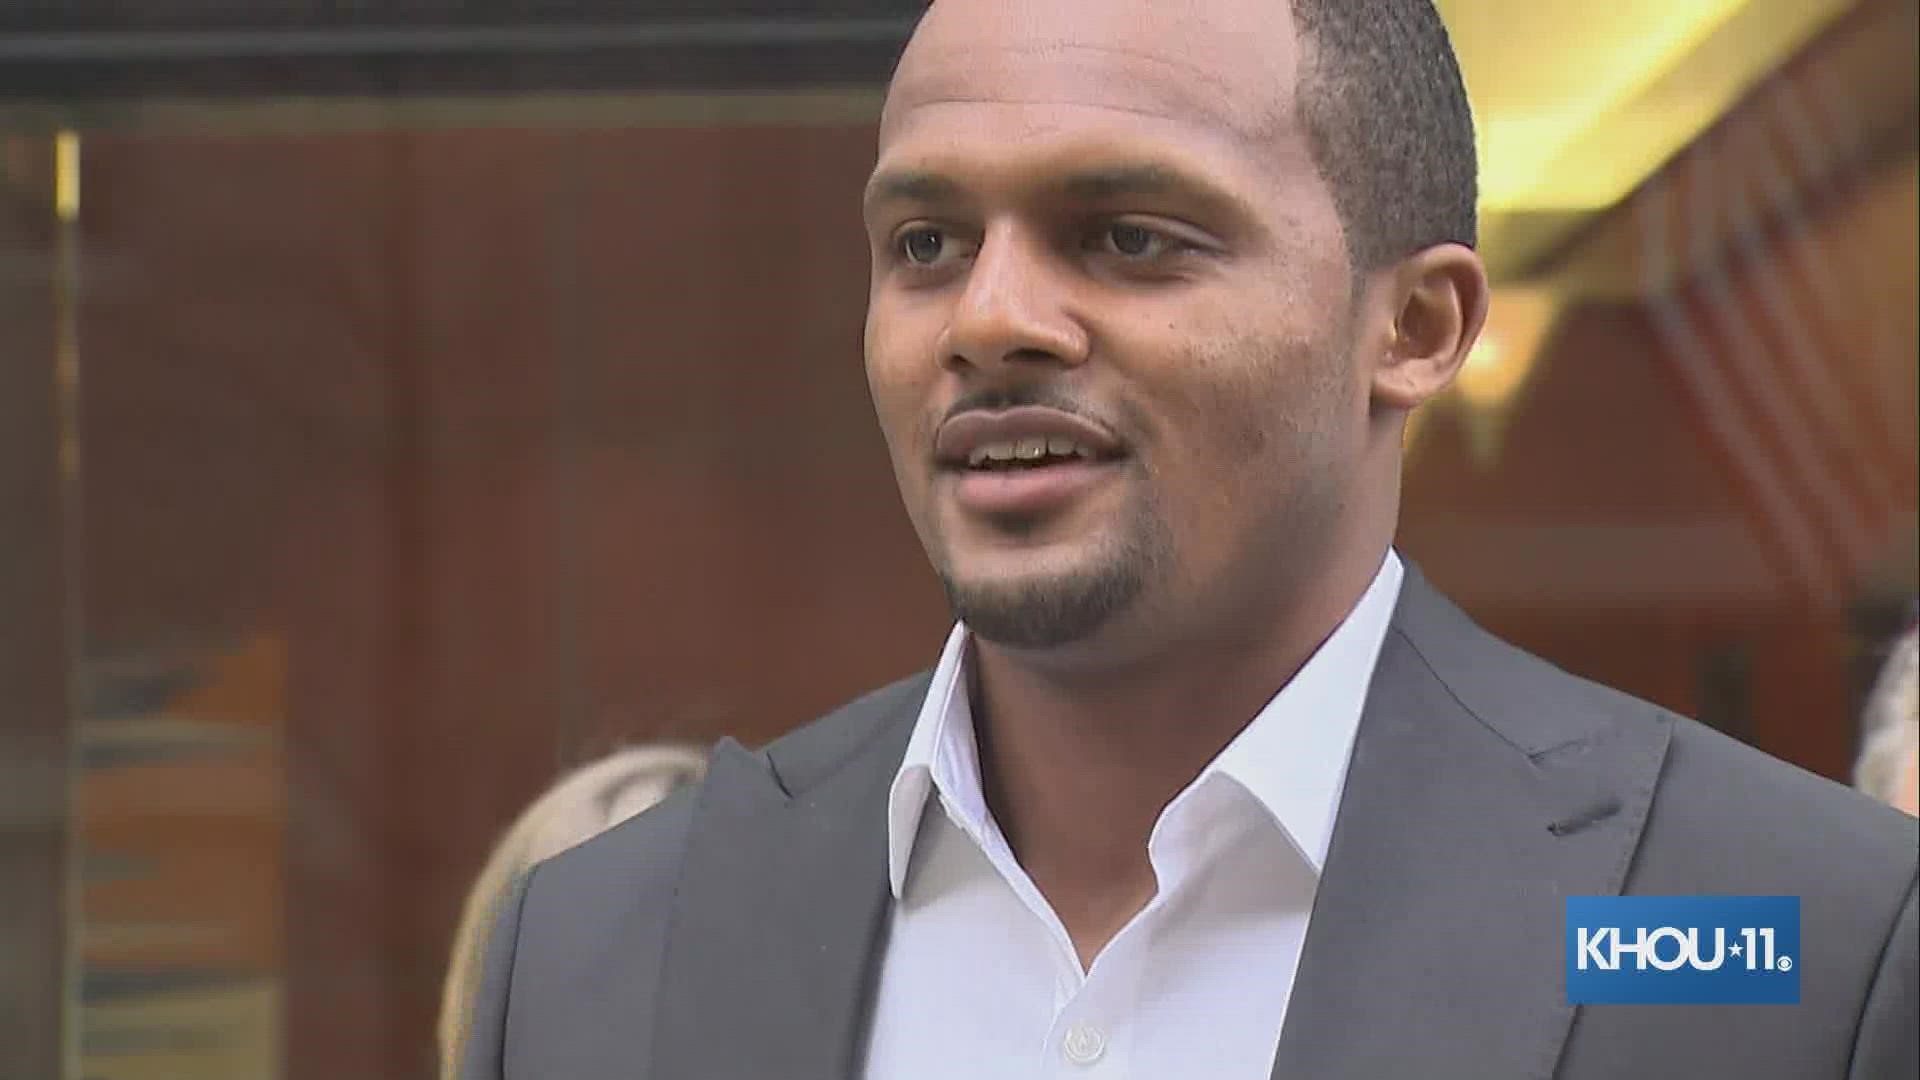 Deshaun Watson and his lawyer speak after a grand jury decides not to indict the quarterback over harassment and sex assault allegations.